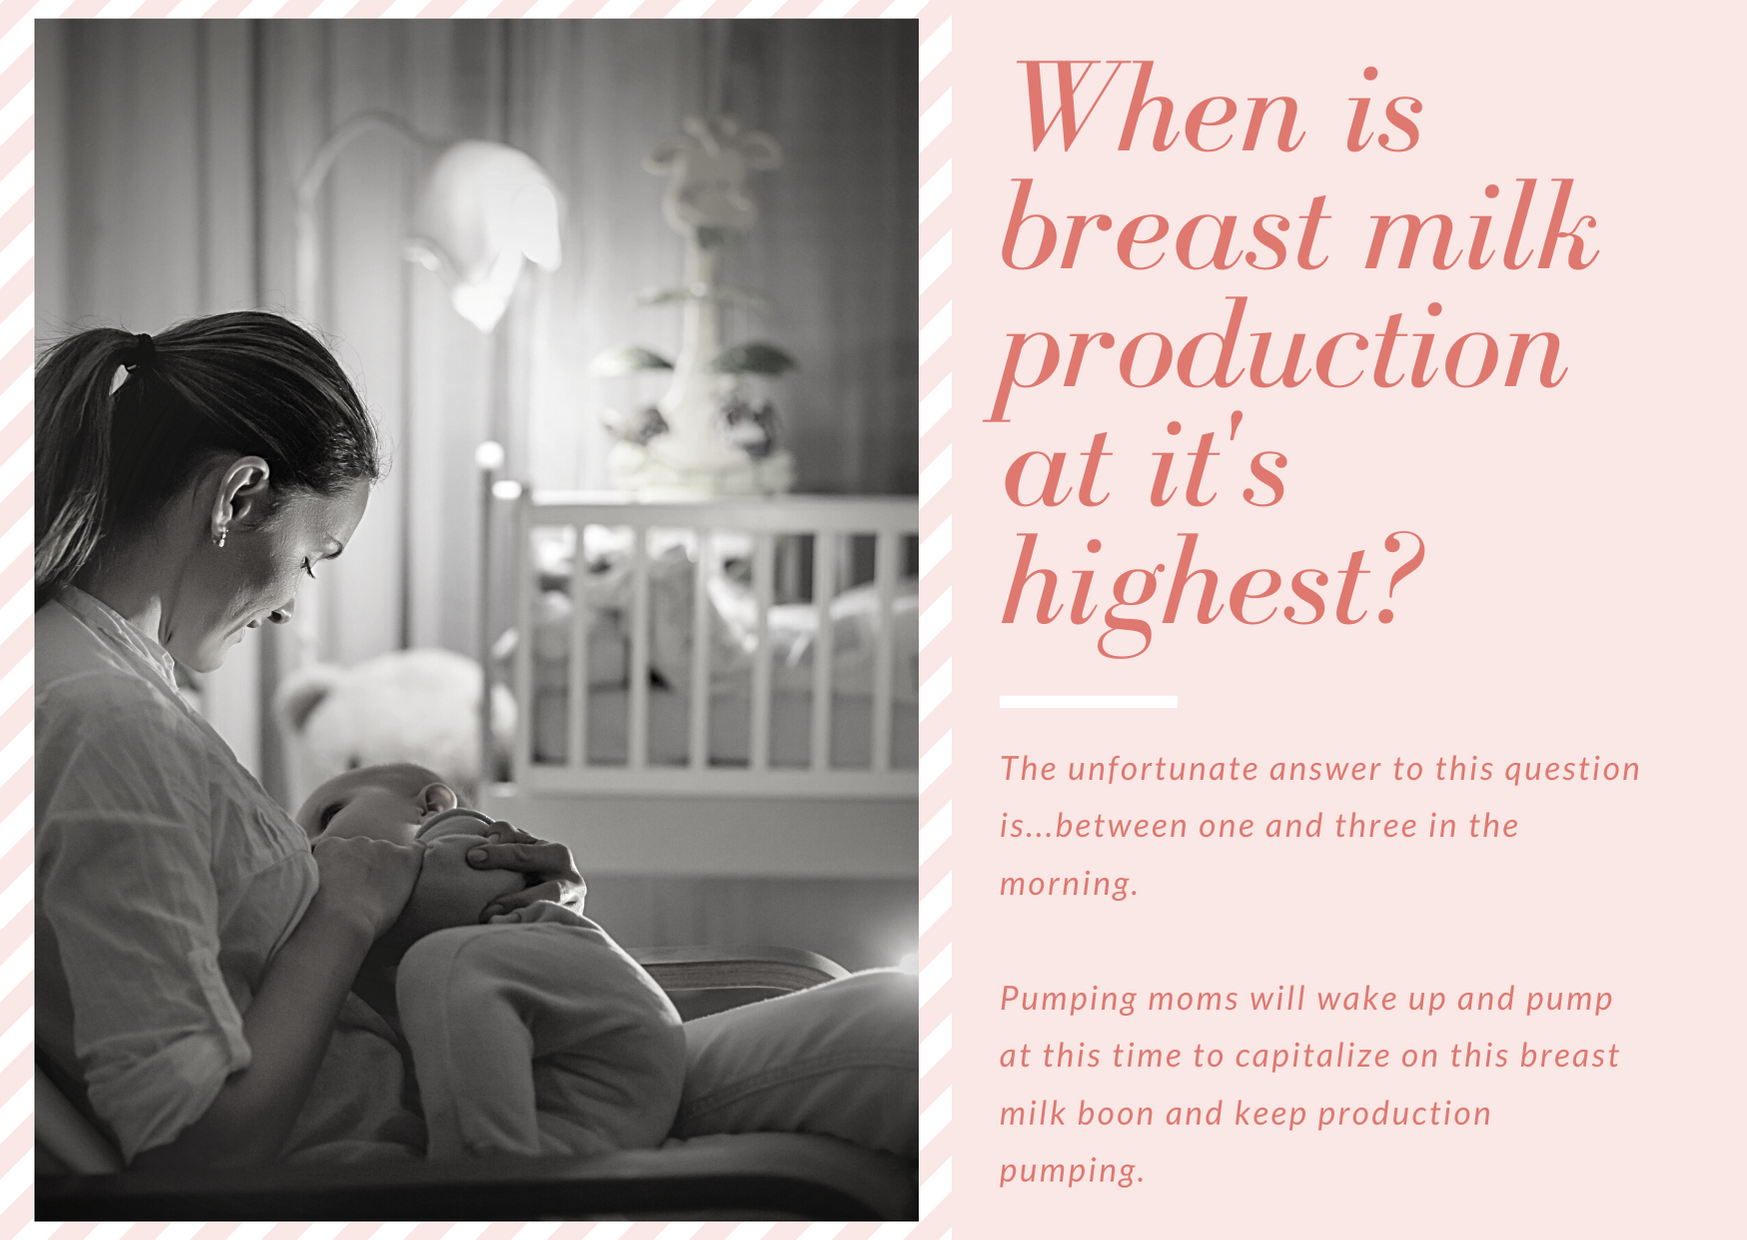 When is breast milk production at it's highest?